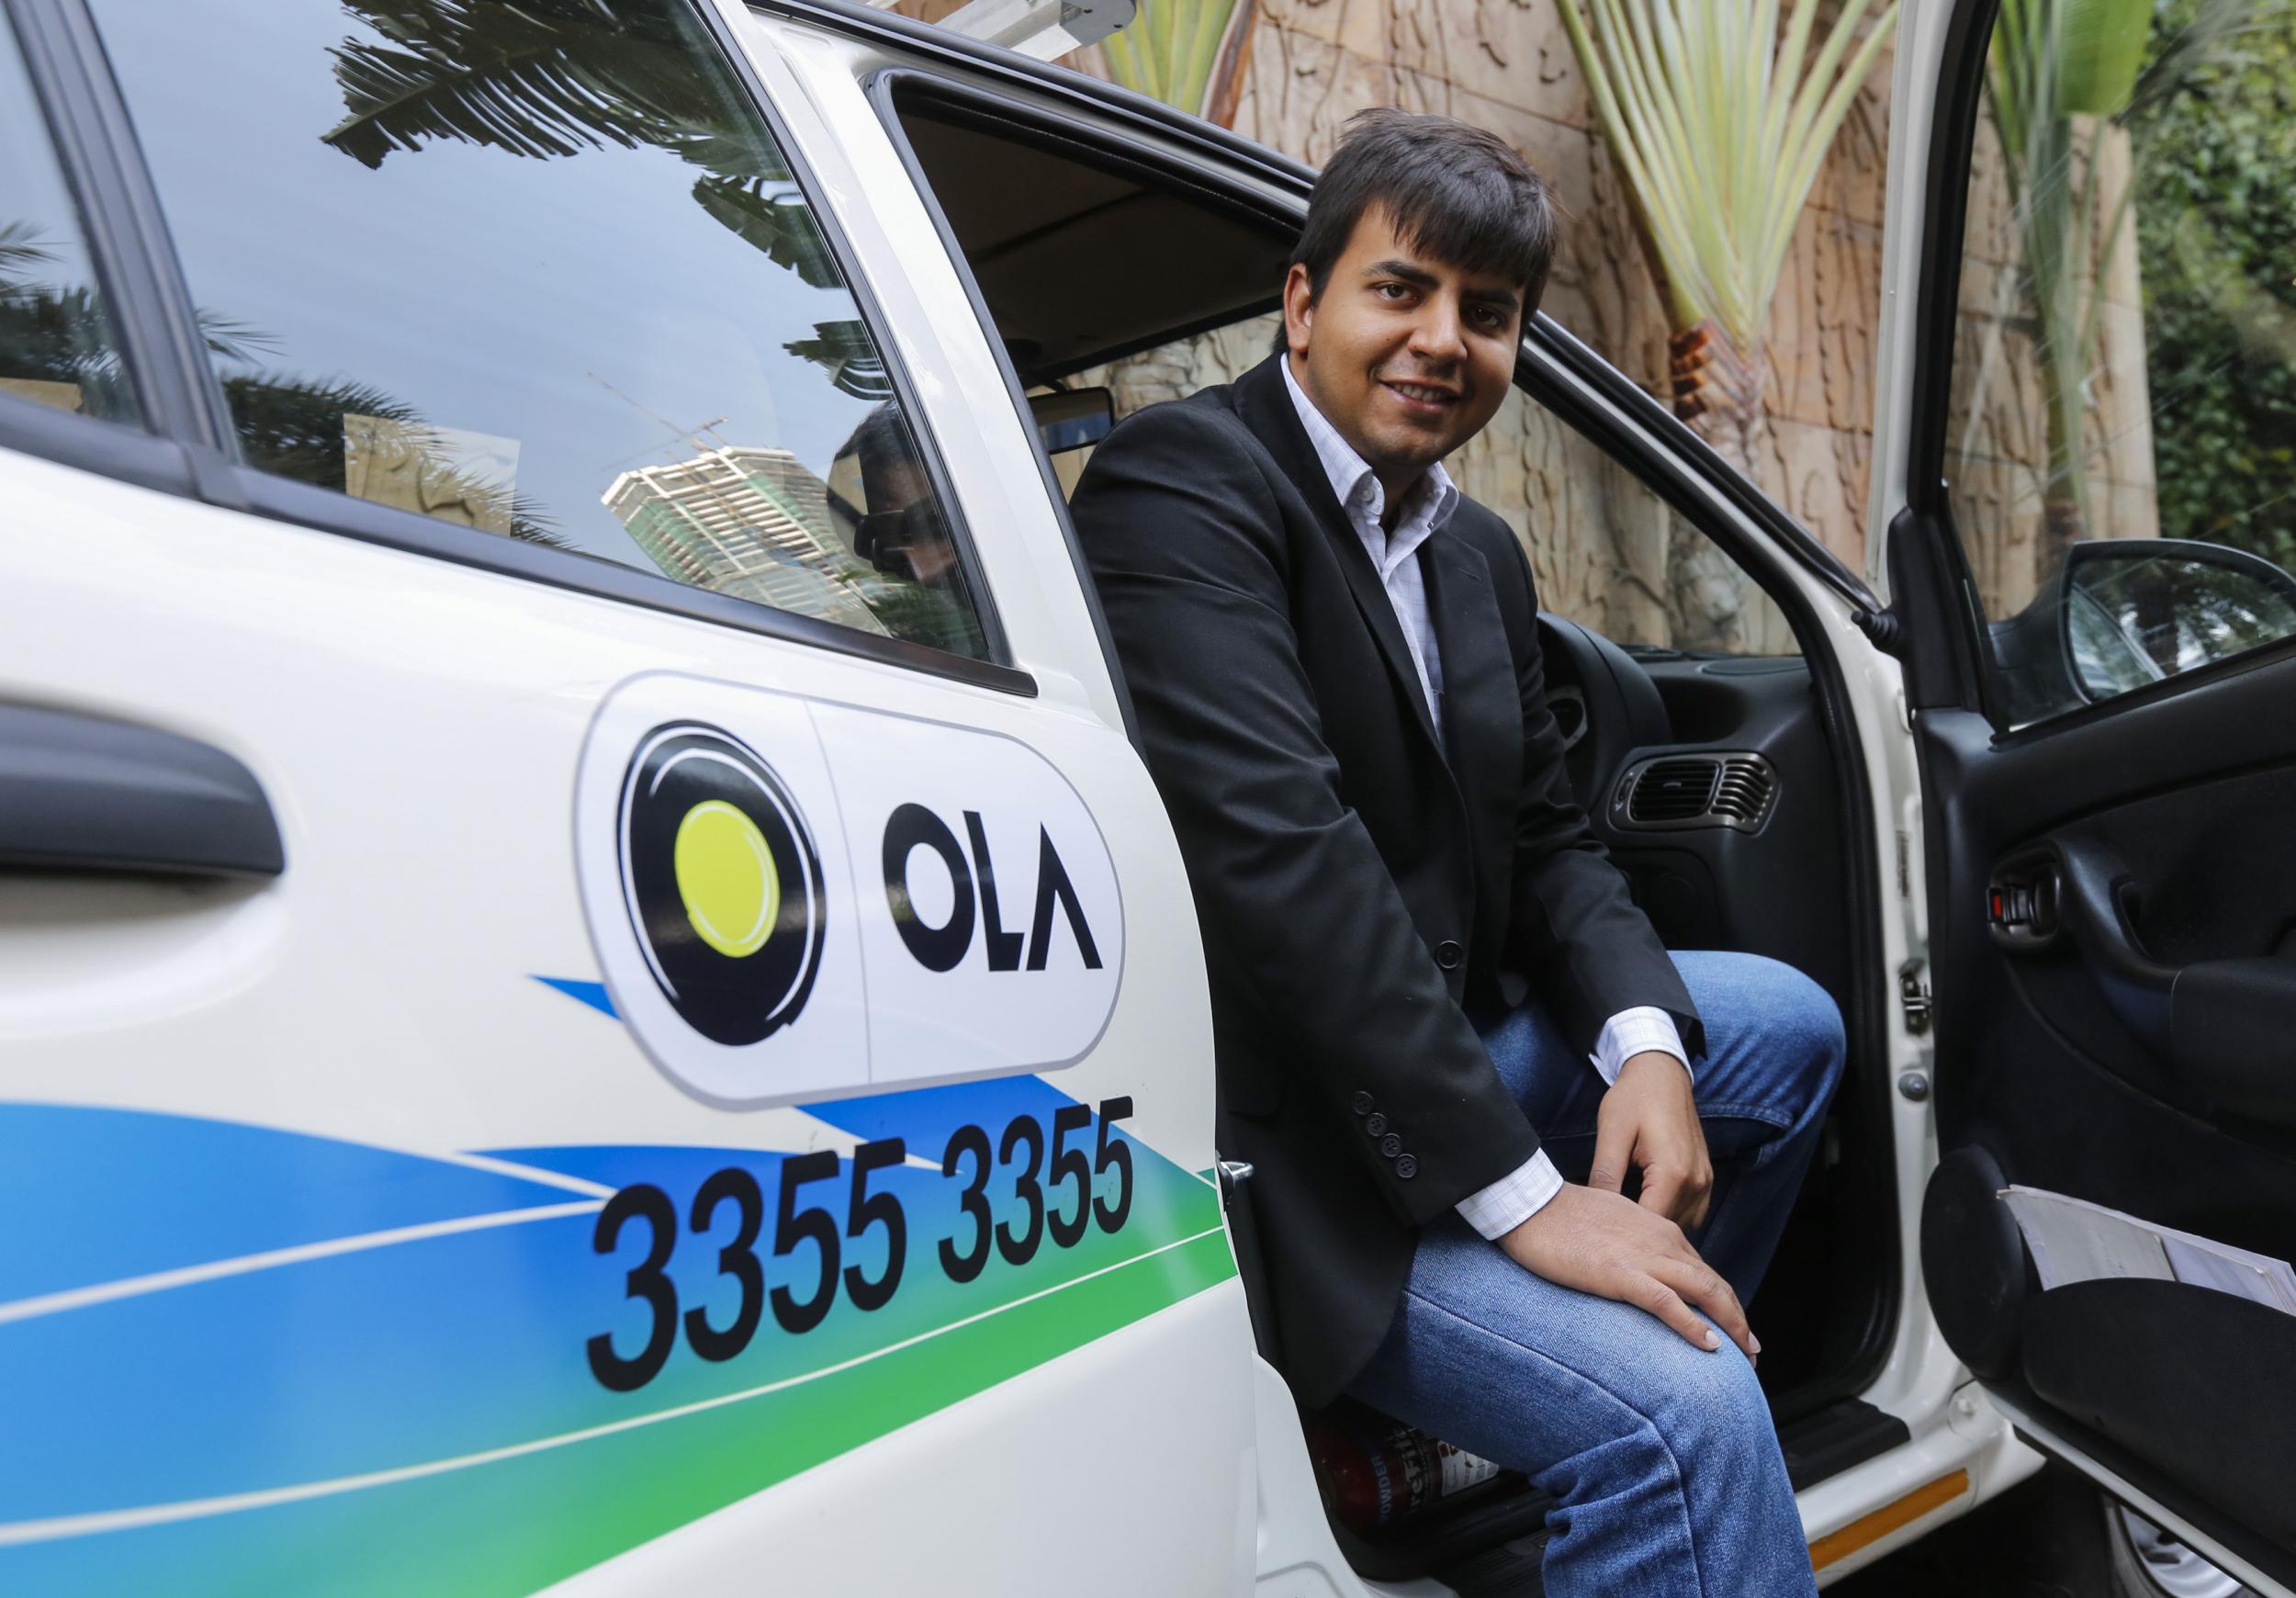 Ola founder Bhavish Aggarwal looks to deepen the presence of his electric cars, rickshaws and small taxis in India